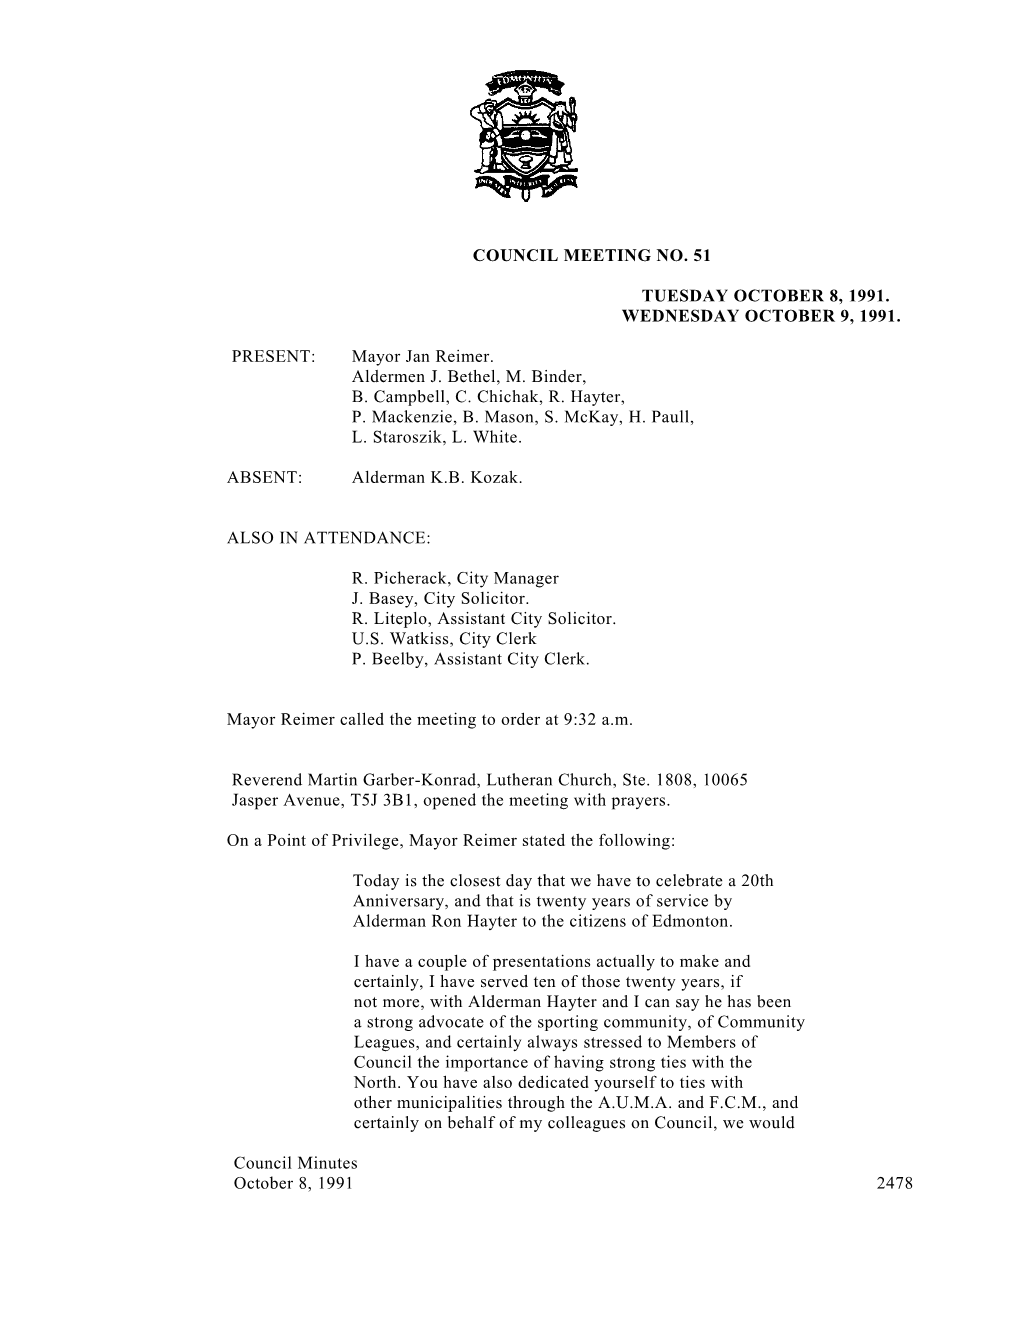 Minutes for City Council October 8, 1991 Meeting